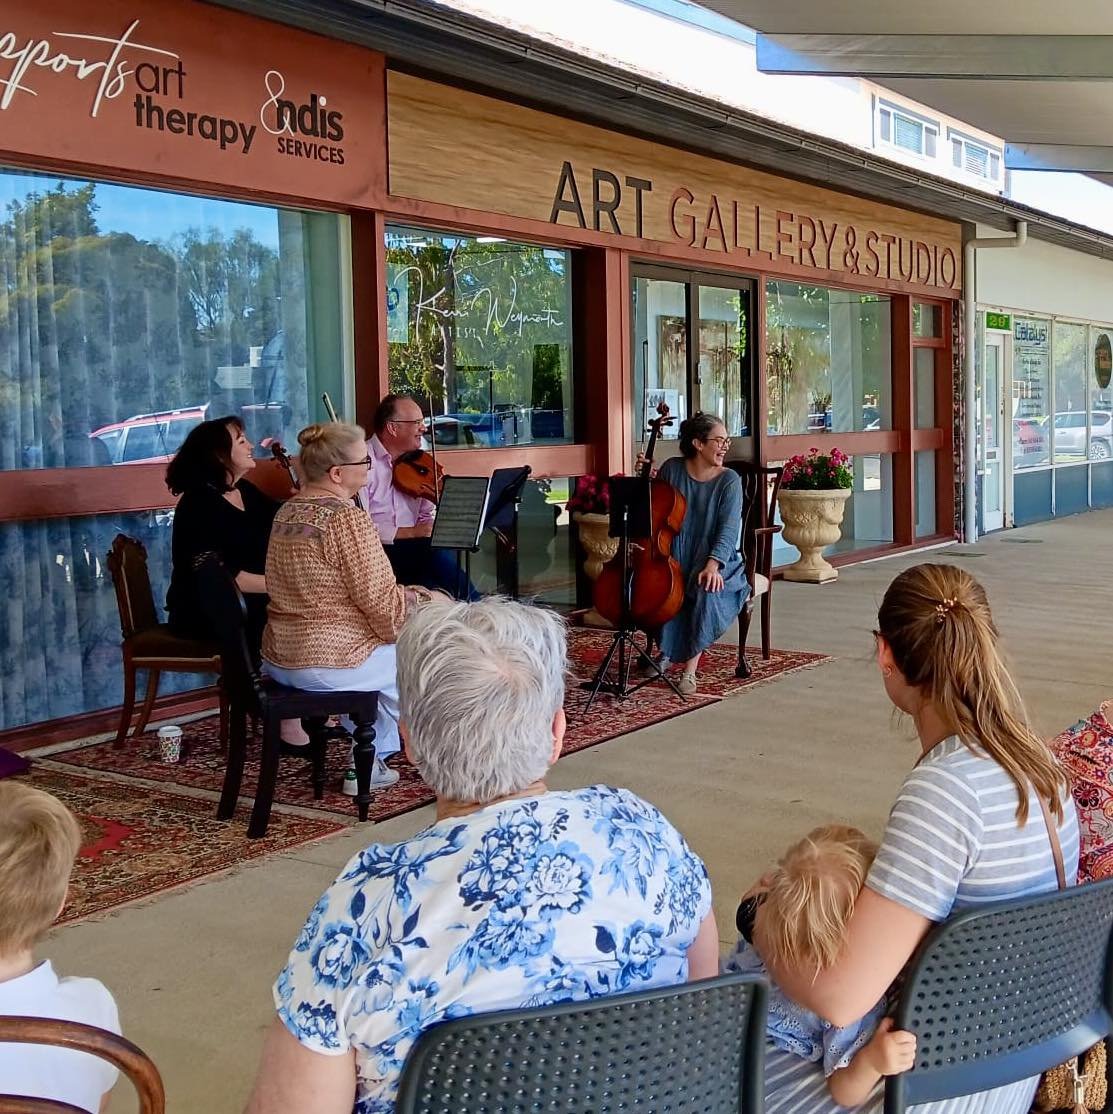 Great weather ☀️ for an outdoor &lsquo;Meet the Instruments&rsquo; 🎻 session at @kerriweymouth&rsquo;s sensational gallery in Coleambally today! 

The gallery is such an interesting creative space, with one room just for sensory art therapy, 🎨 with